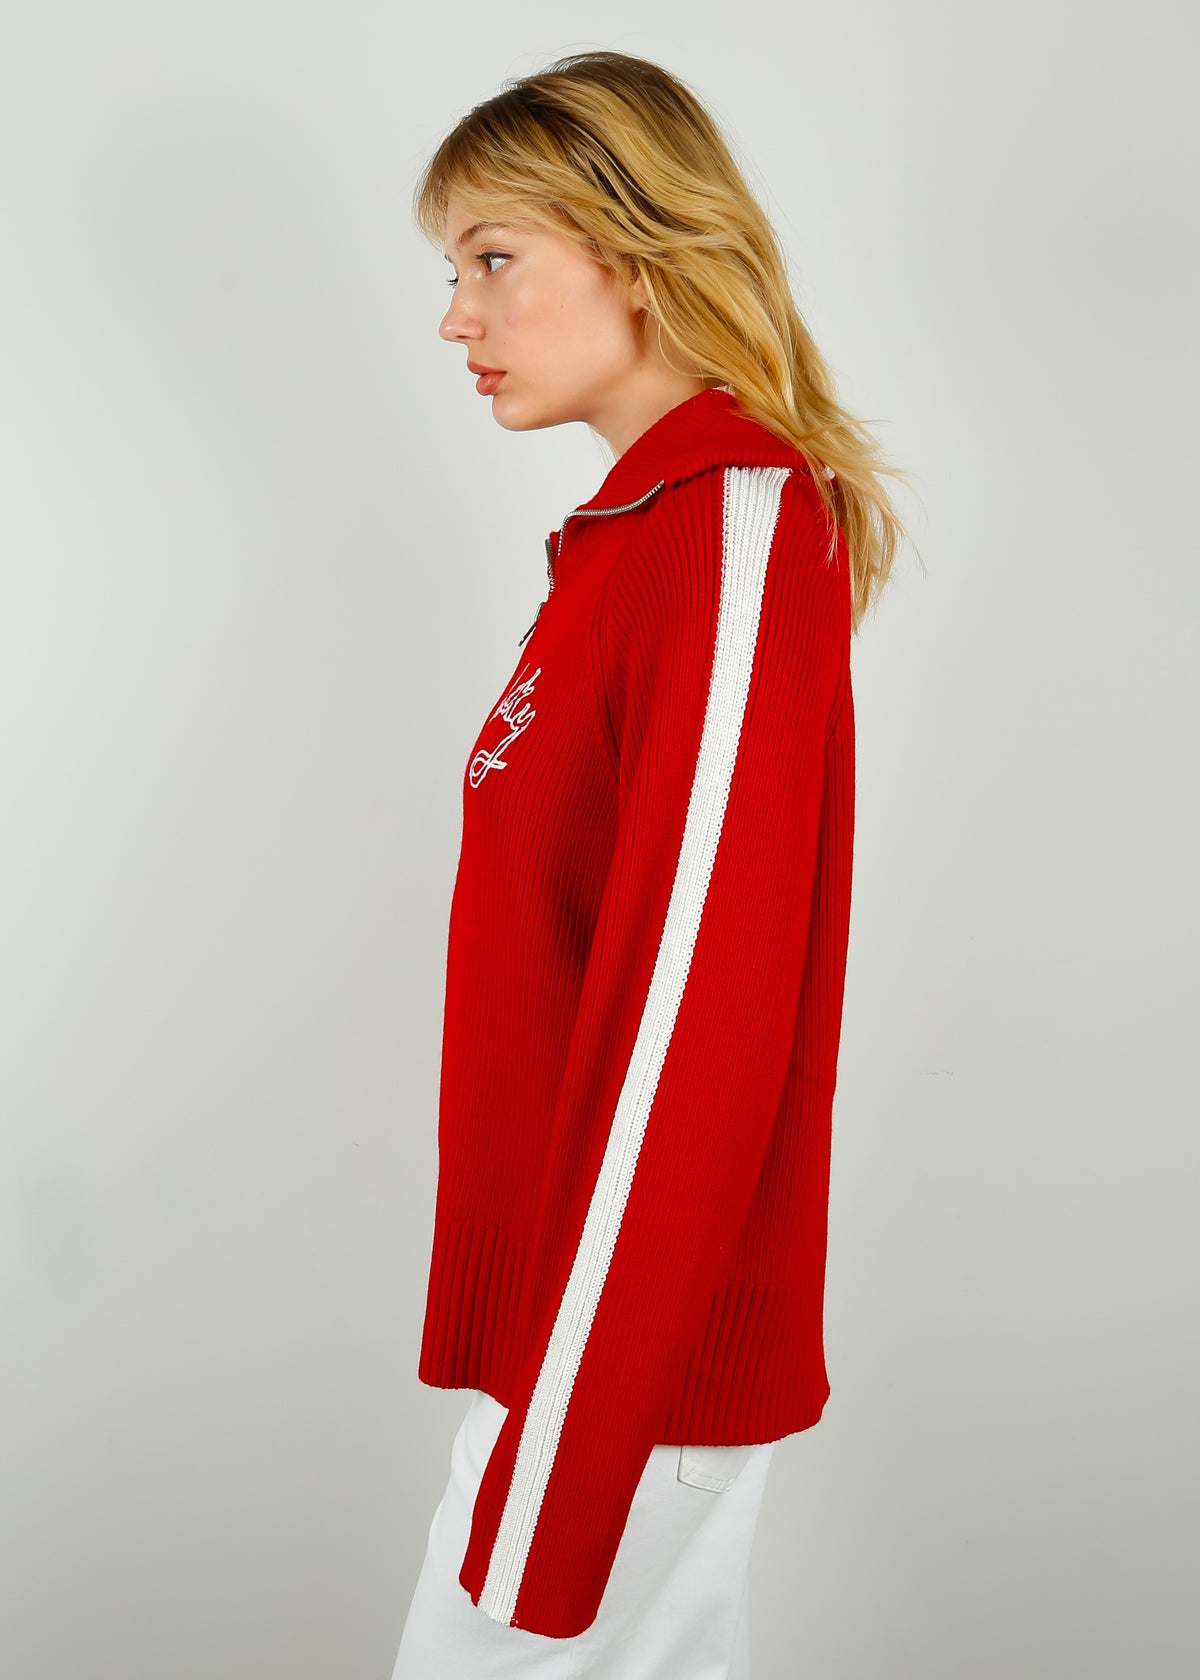 BF Zip Up Lucky Jumper in Red